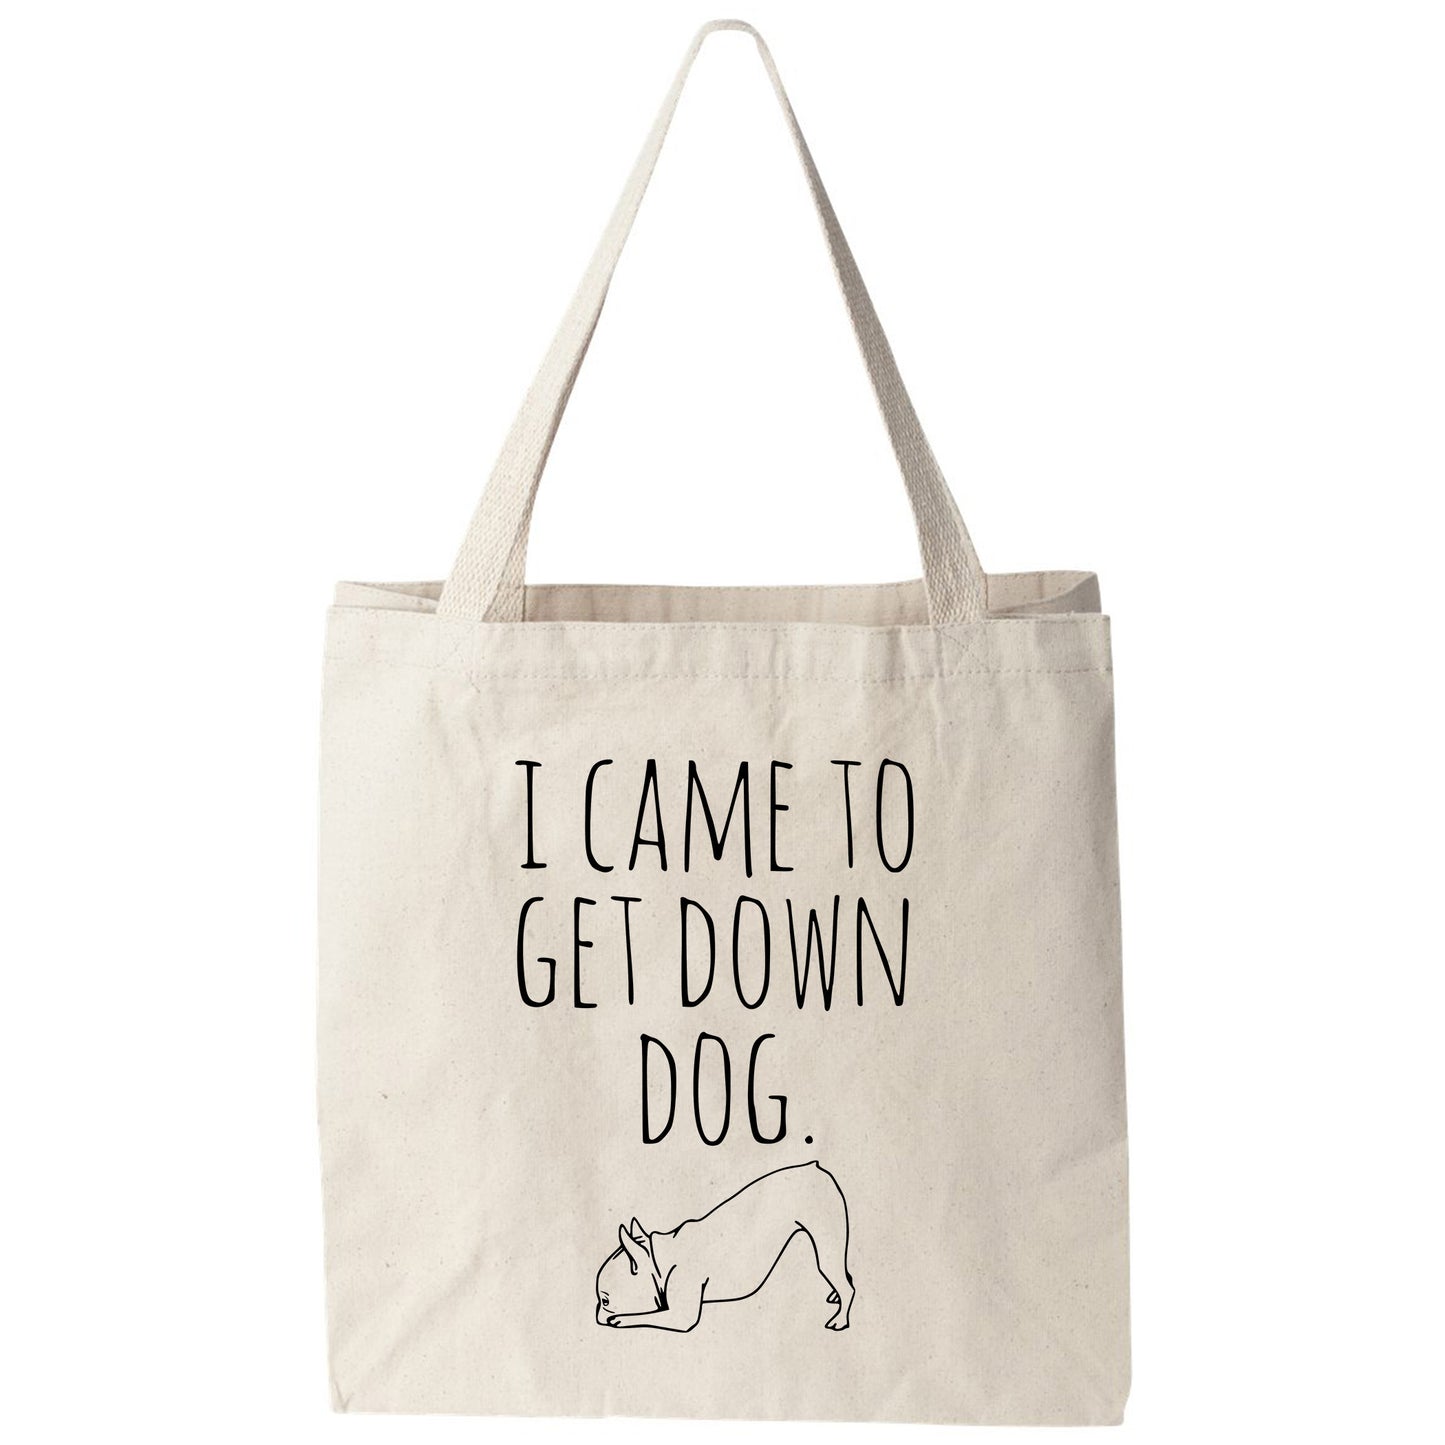 a tote bag that says i came to get down dog